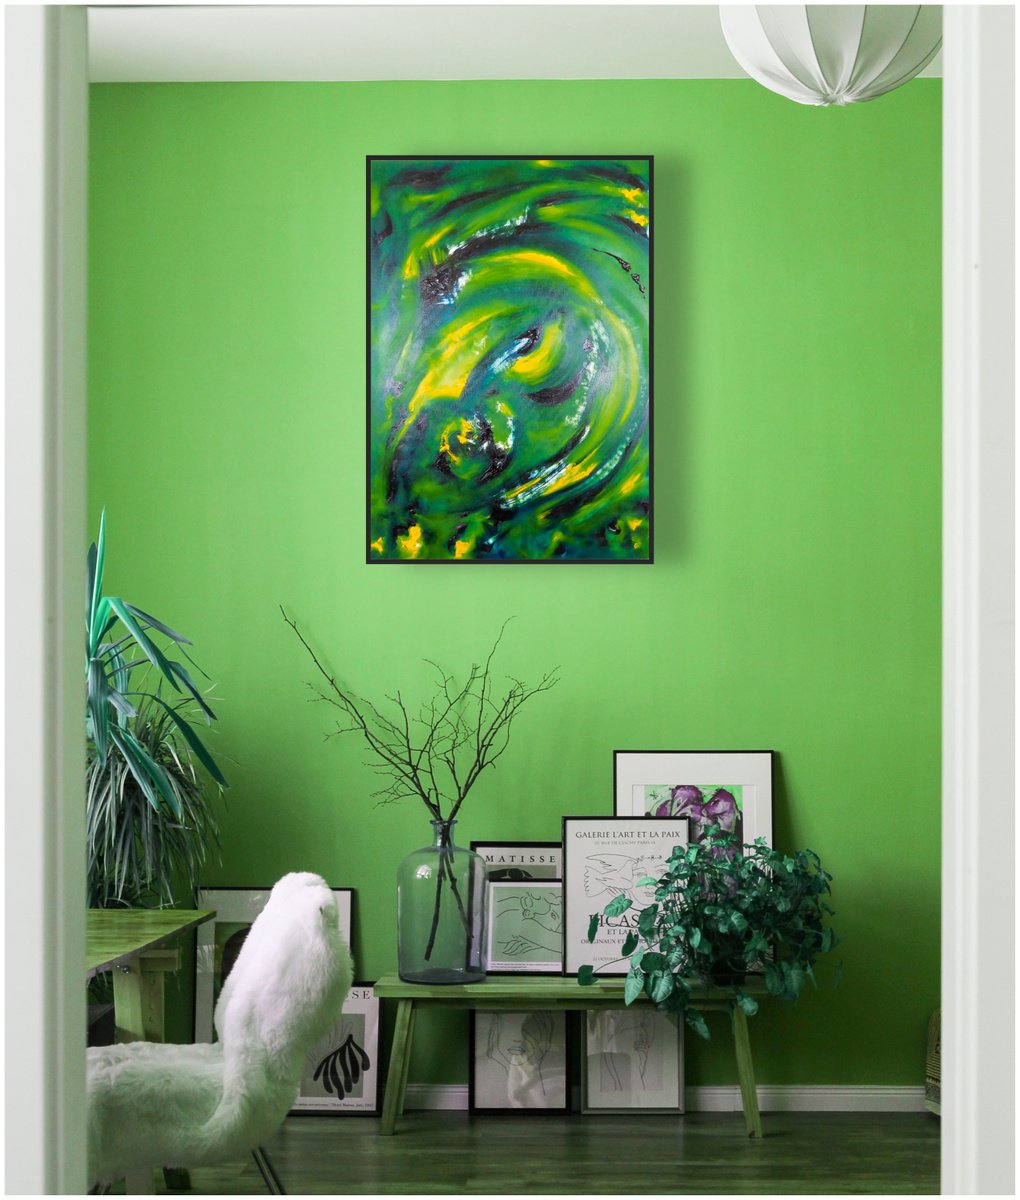 Untitled in green - 55x75 cm, Original abstract painting, oil on canvas by Davide De Palma